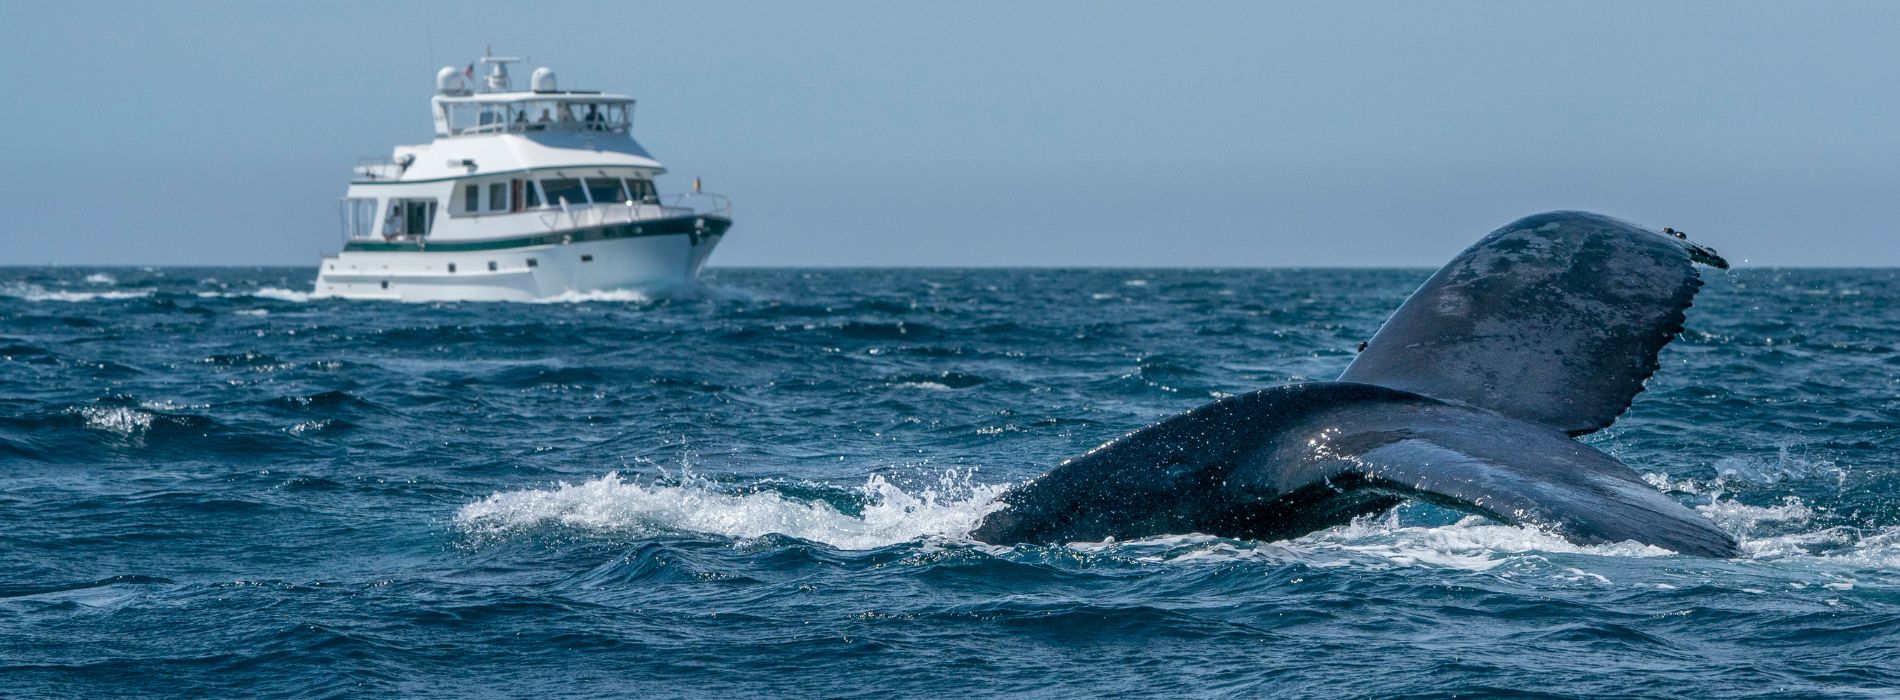 The Best Whale Watching Tour in Maui: A Dream Come True - Madeinsea©